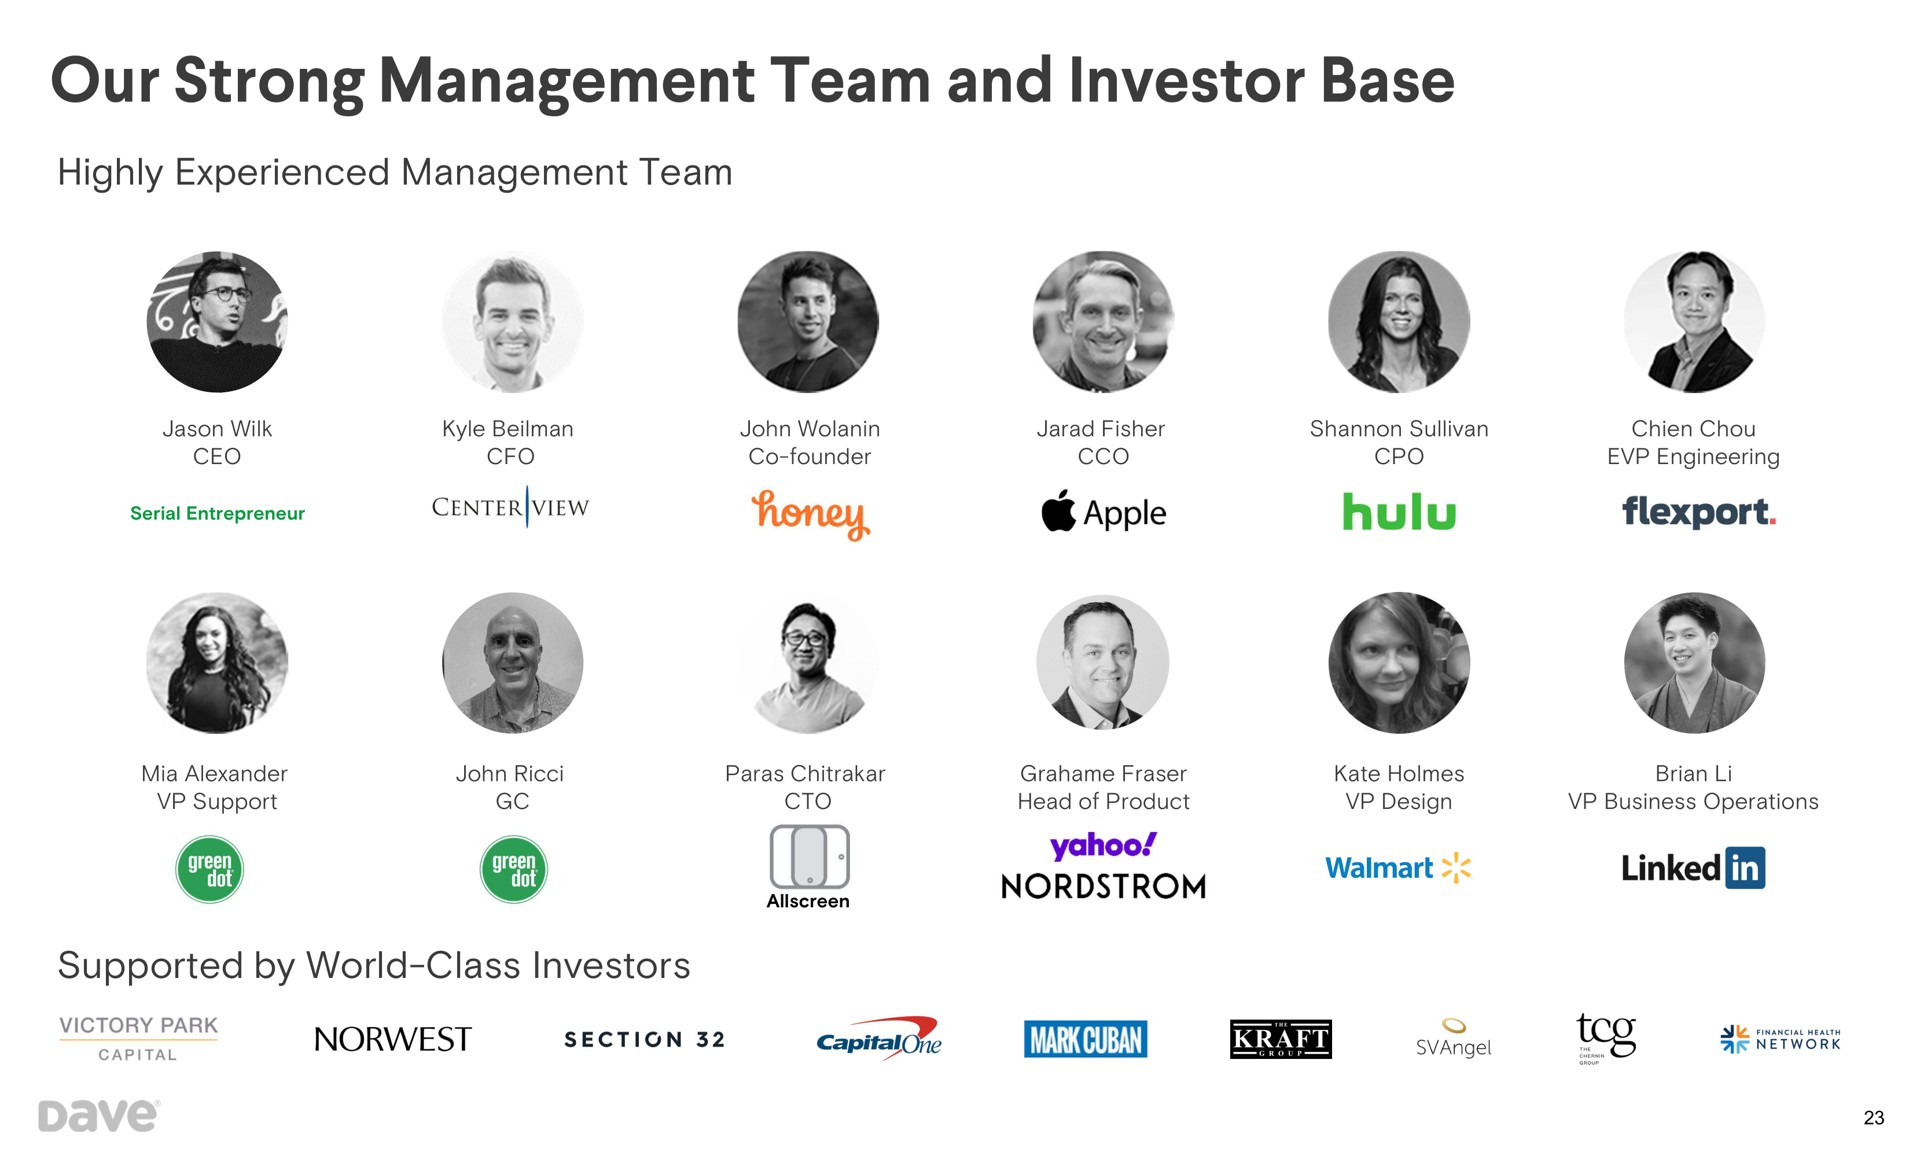 highly experienced management team supported by world class investors our strong and investor base | Dave